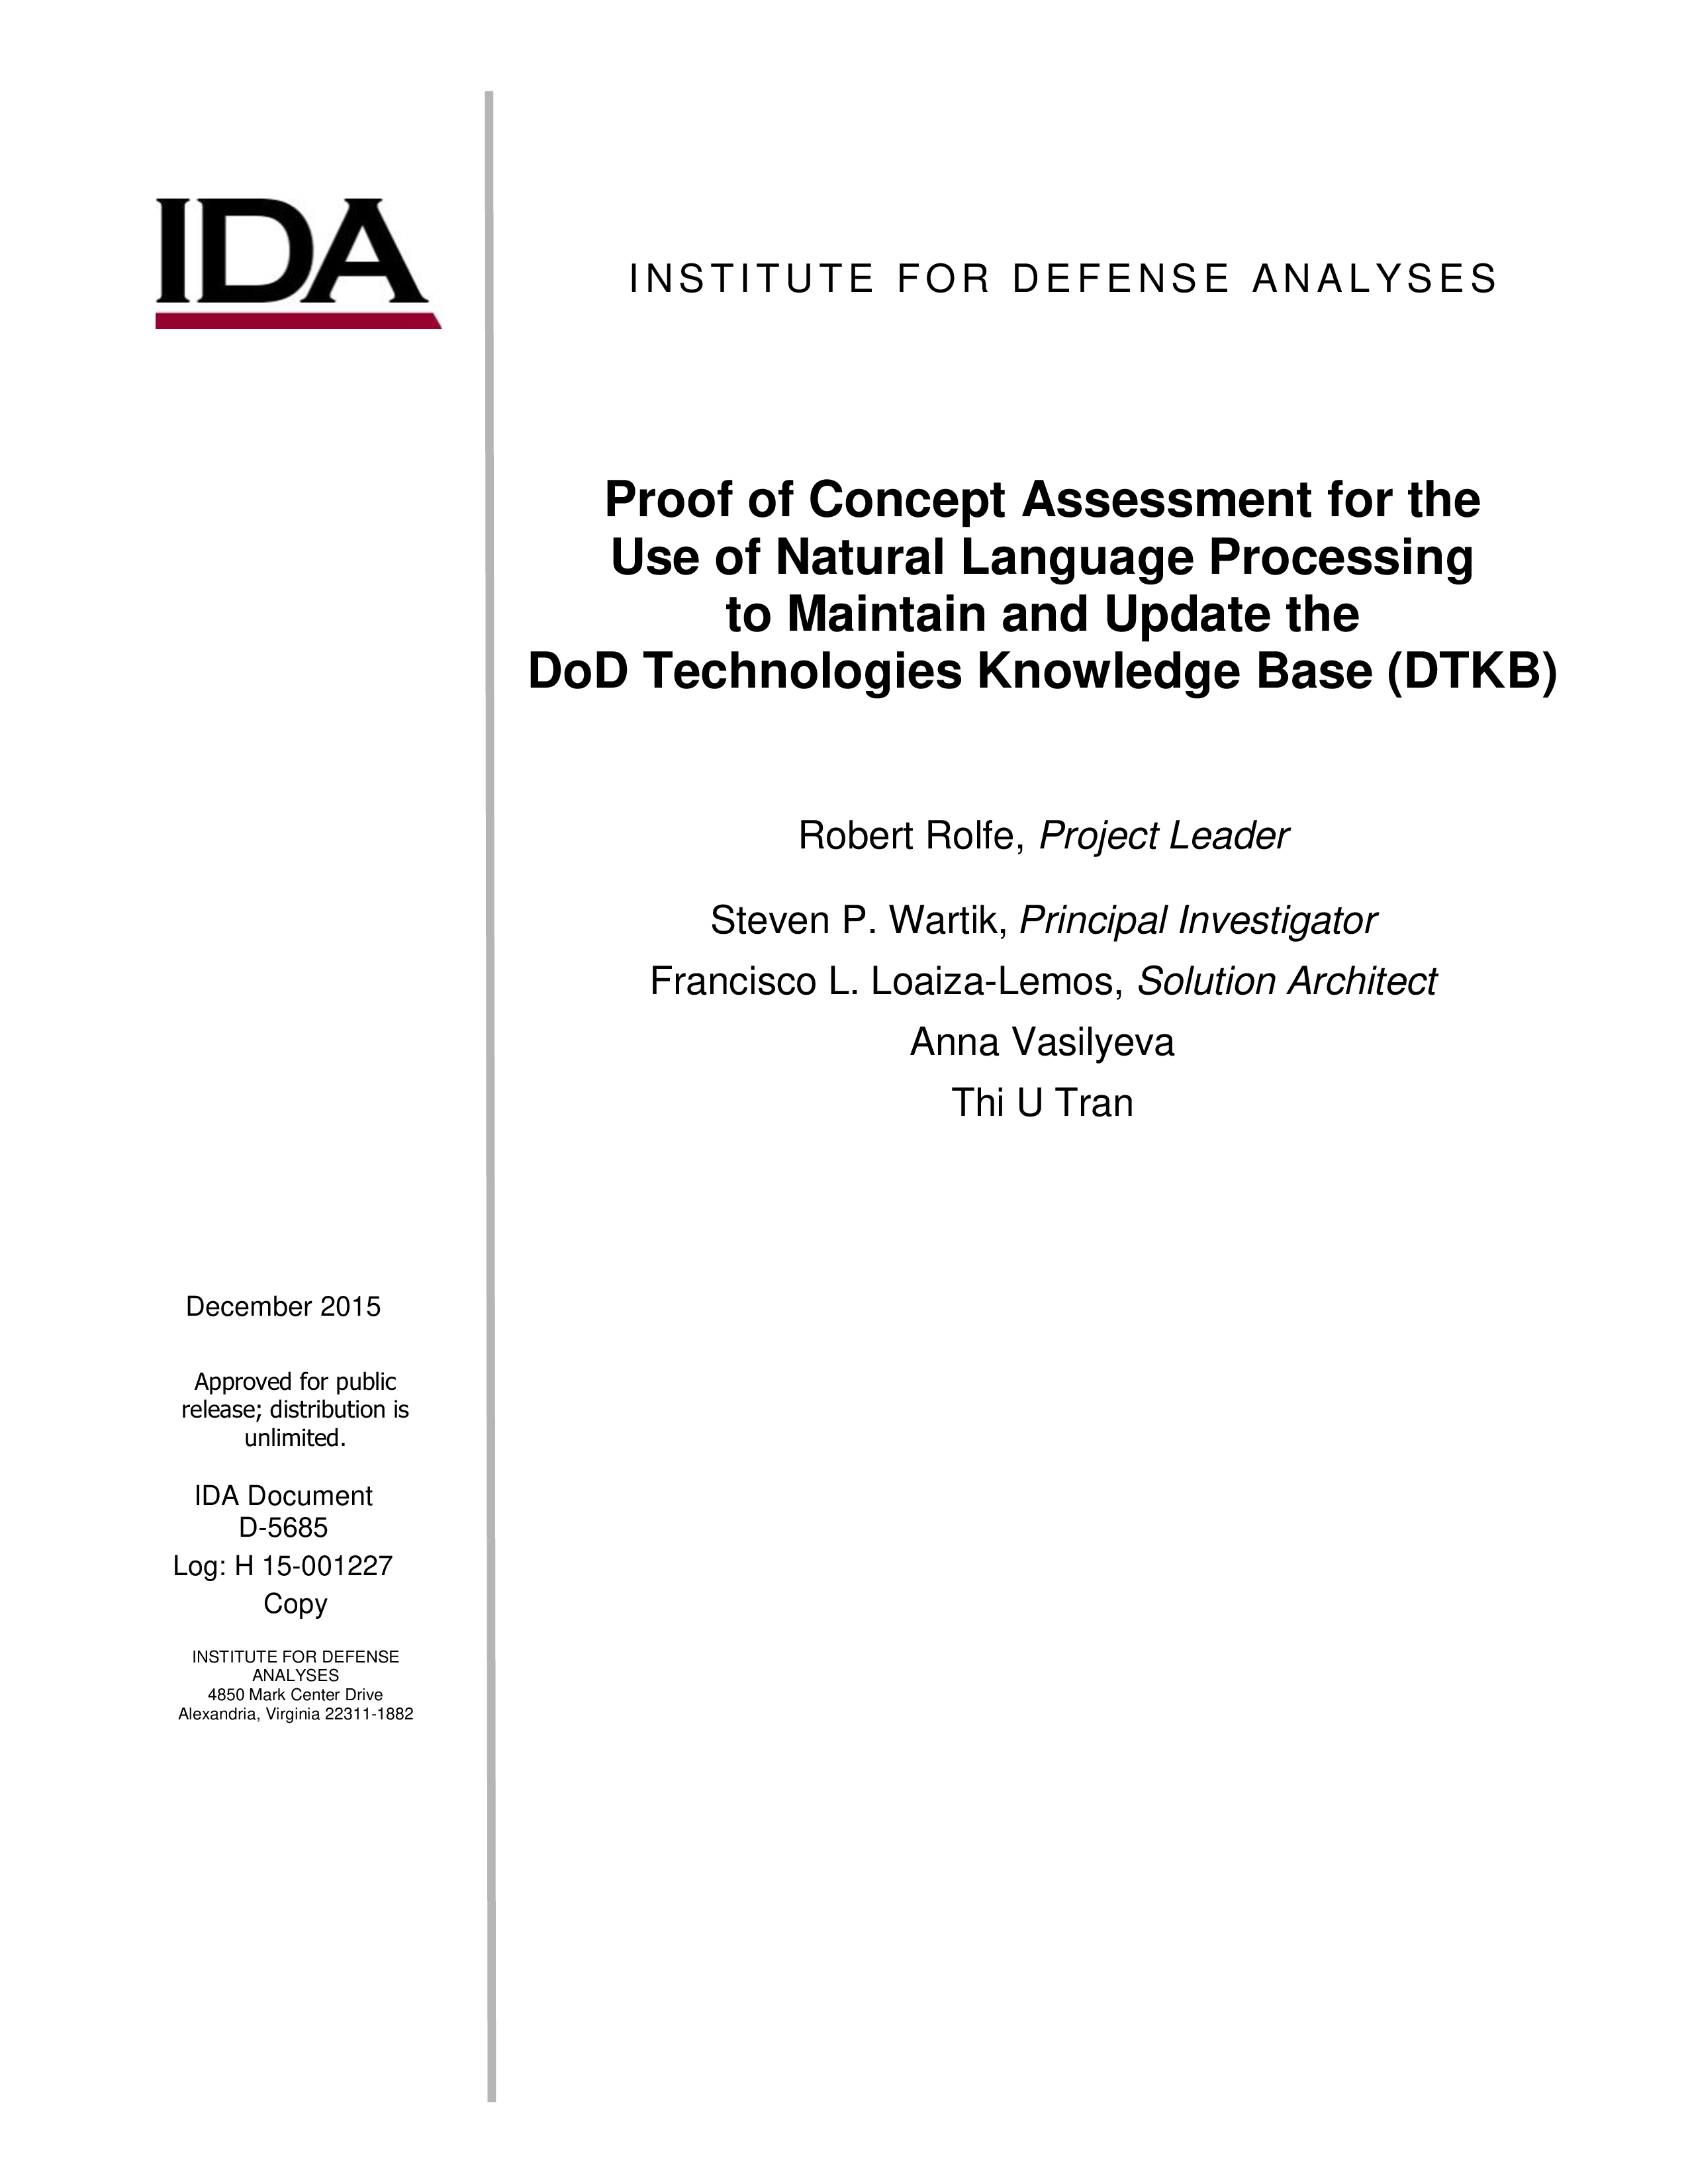 Proof of Concept Assessment for the Use of Natural Language Processing to Maintain and Update the DoD Technologies Knowledge Base (DTKB)